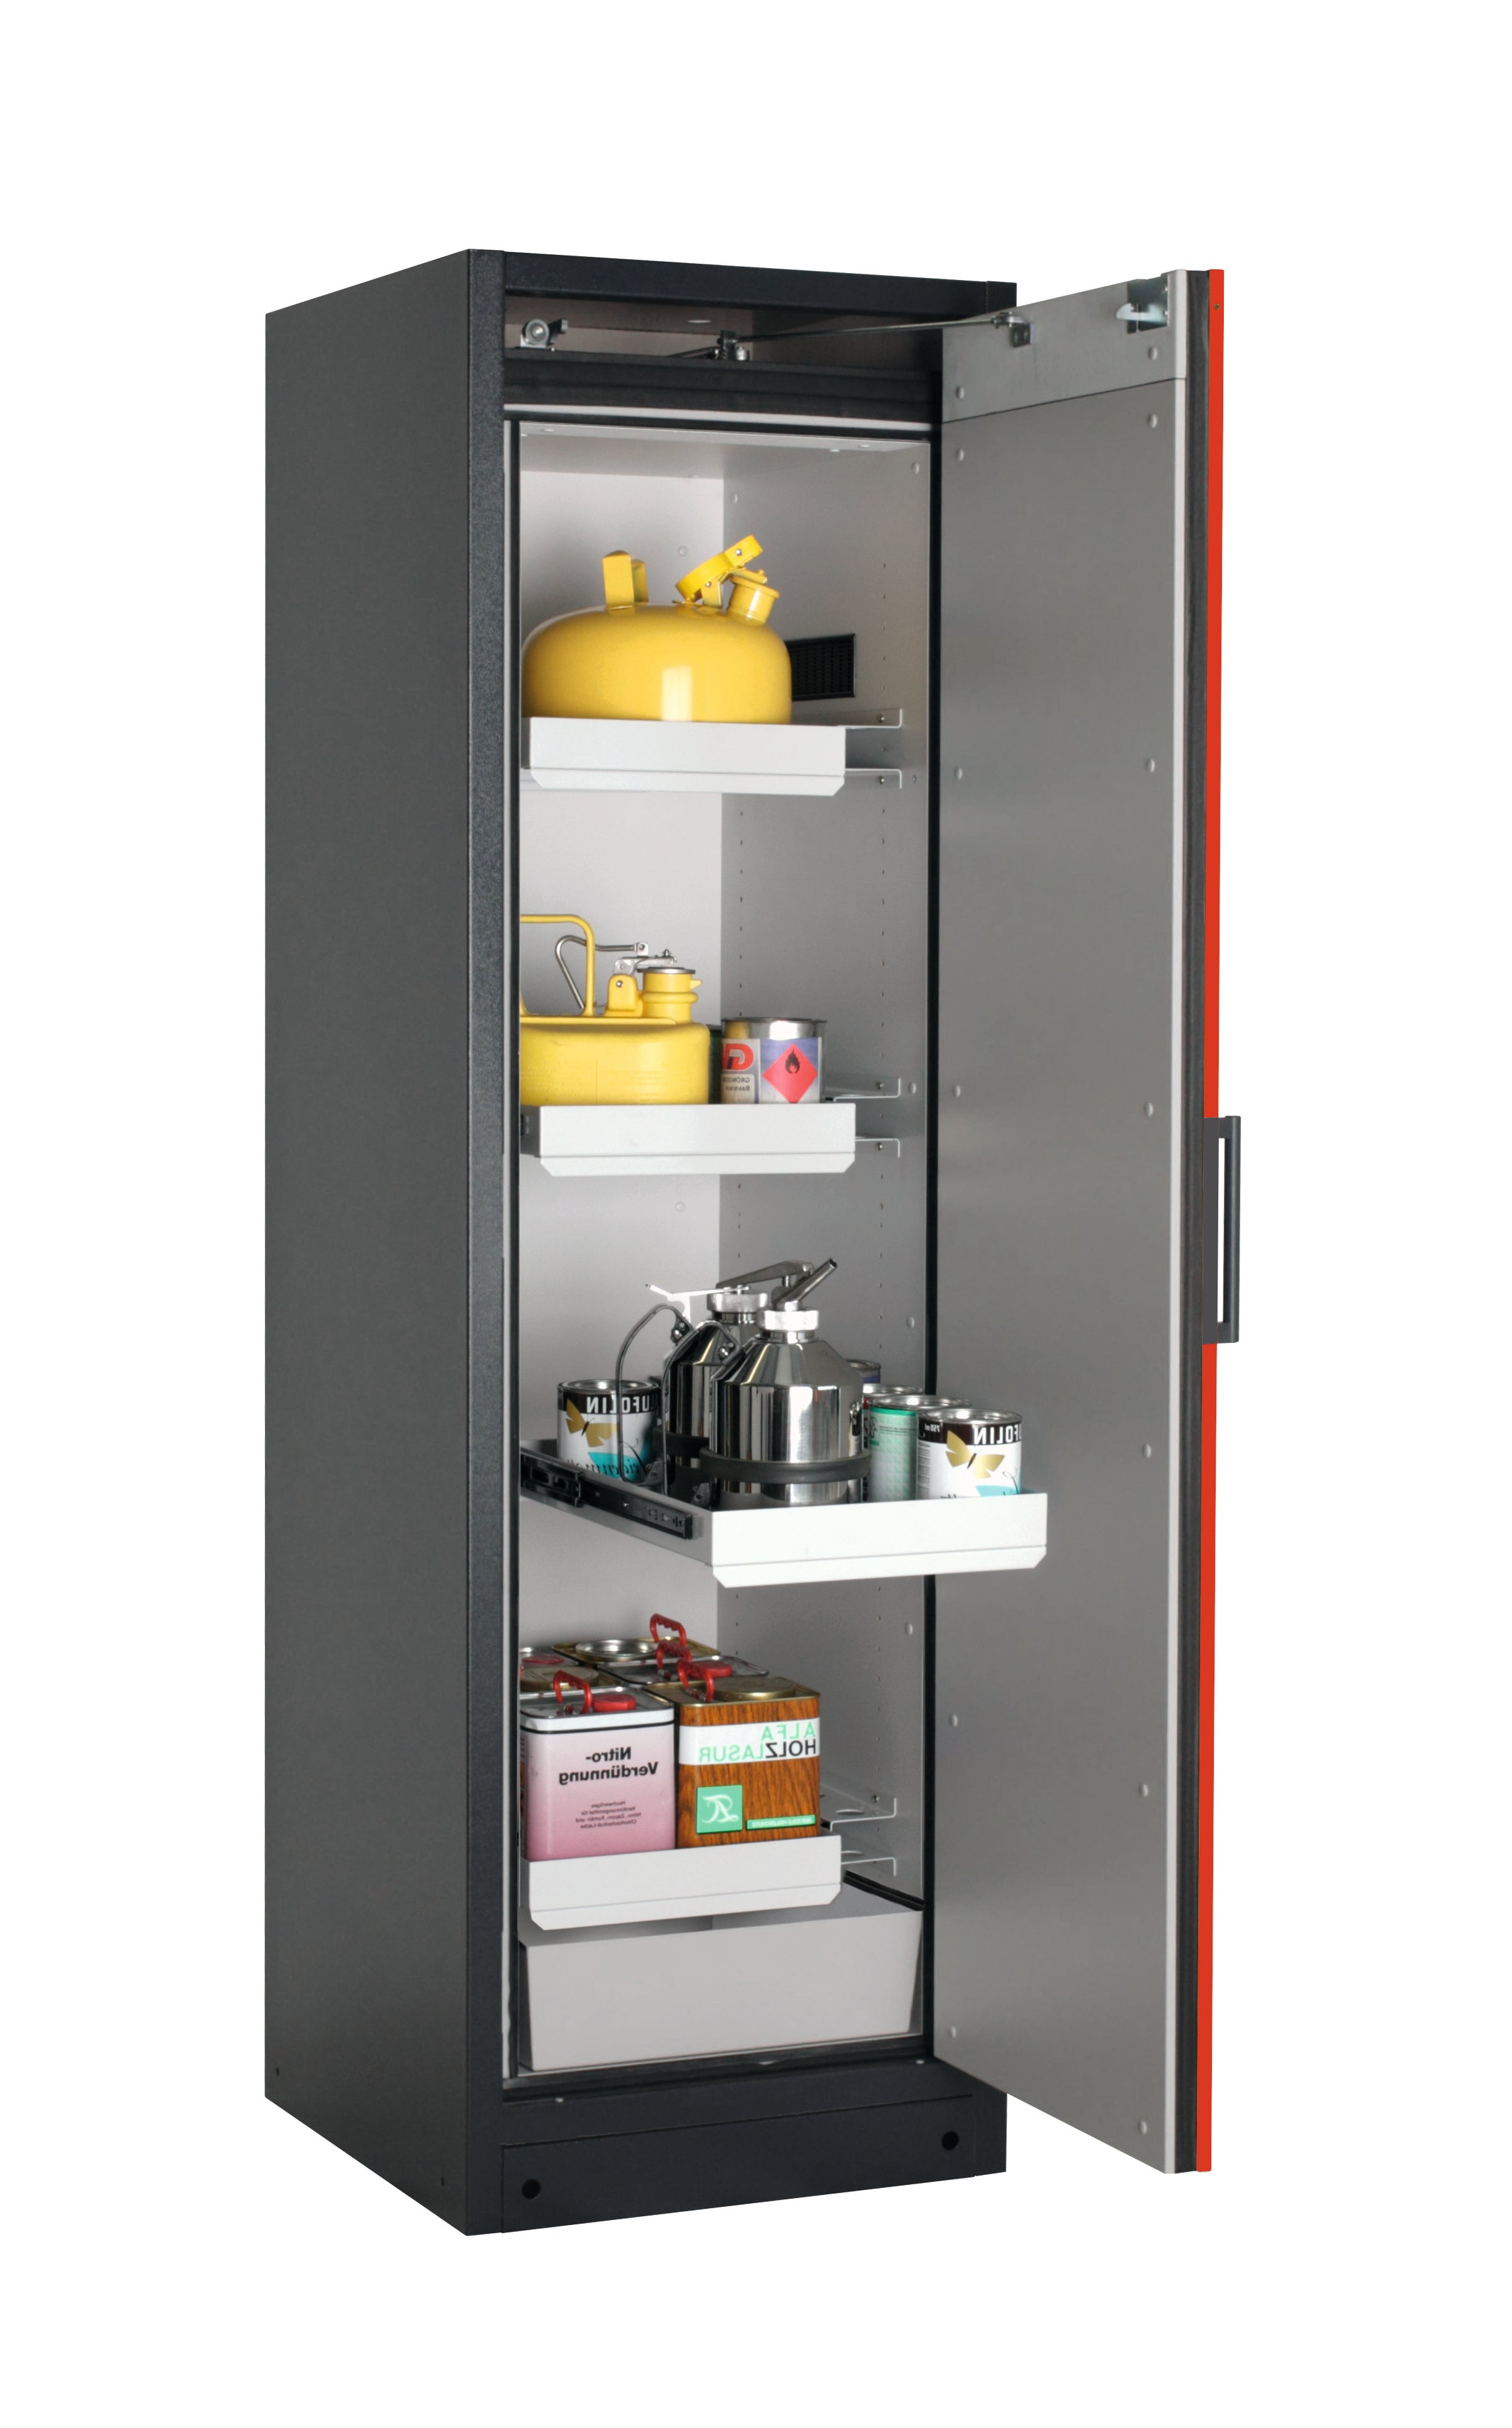 Type 90 safety storage cabinet Q-CLASSIC-90 model Q90.195.060.R in traffic red RAL 3020 with 3x drawer (standard) (sheet steel),